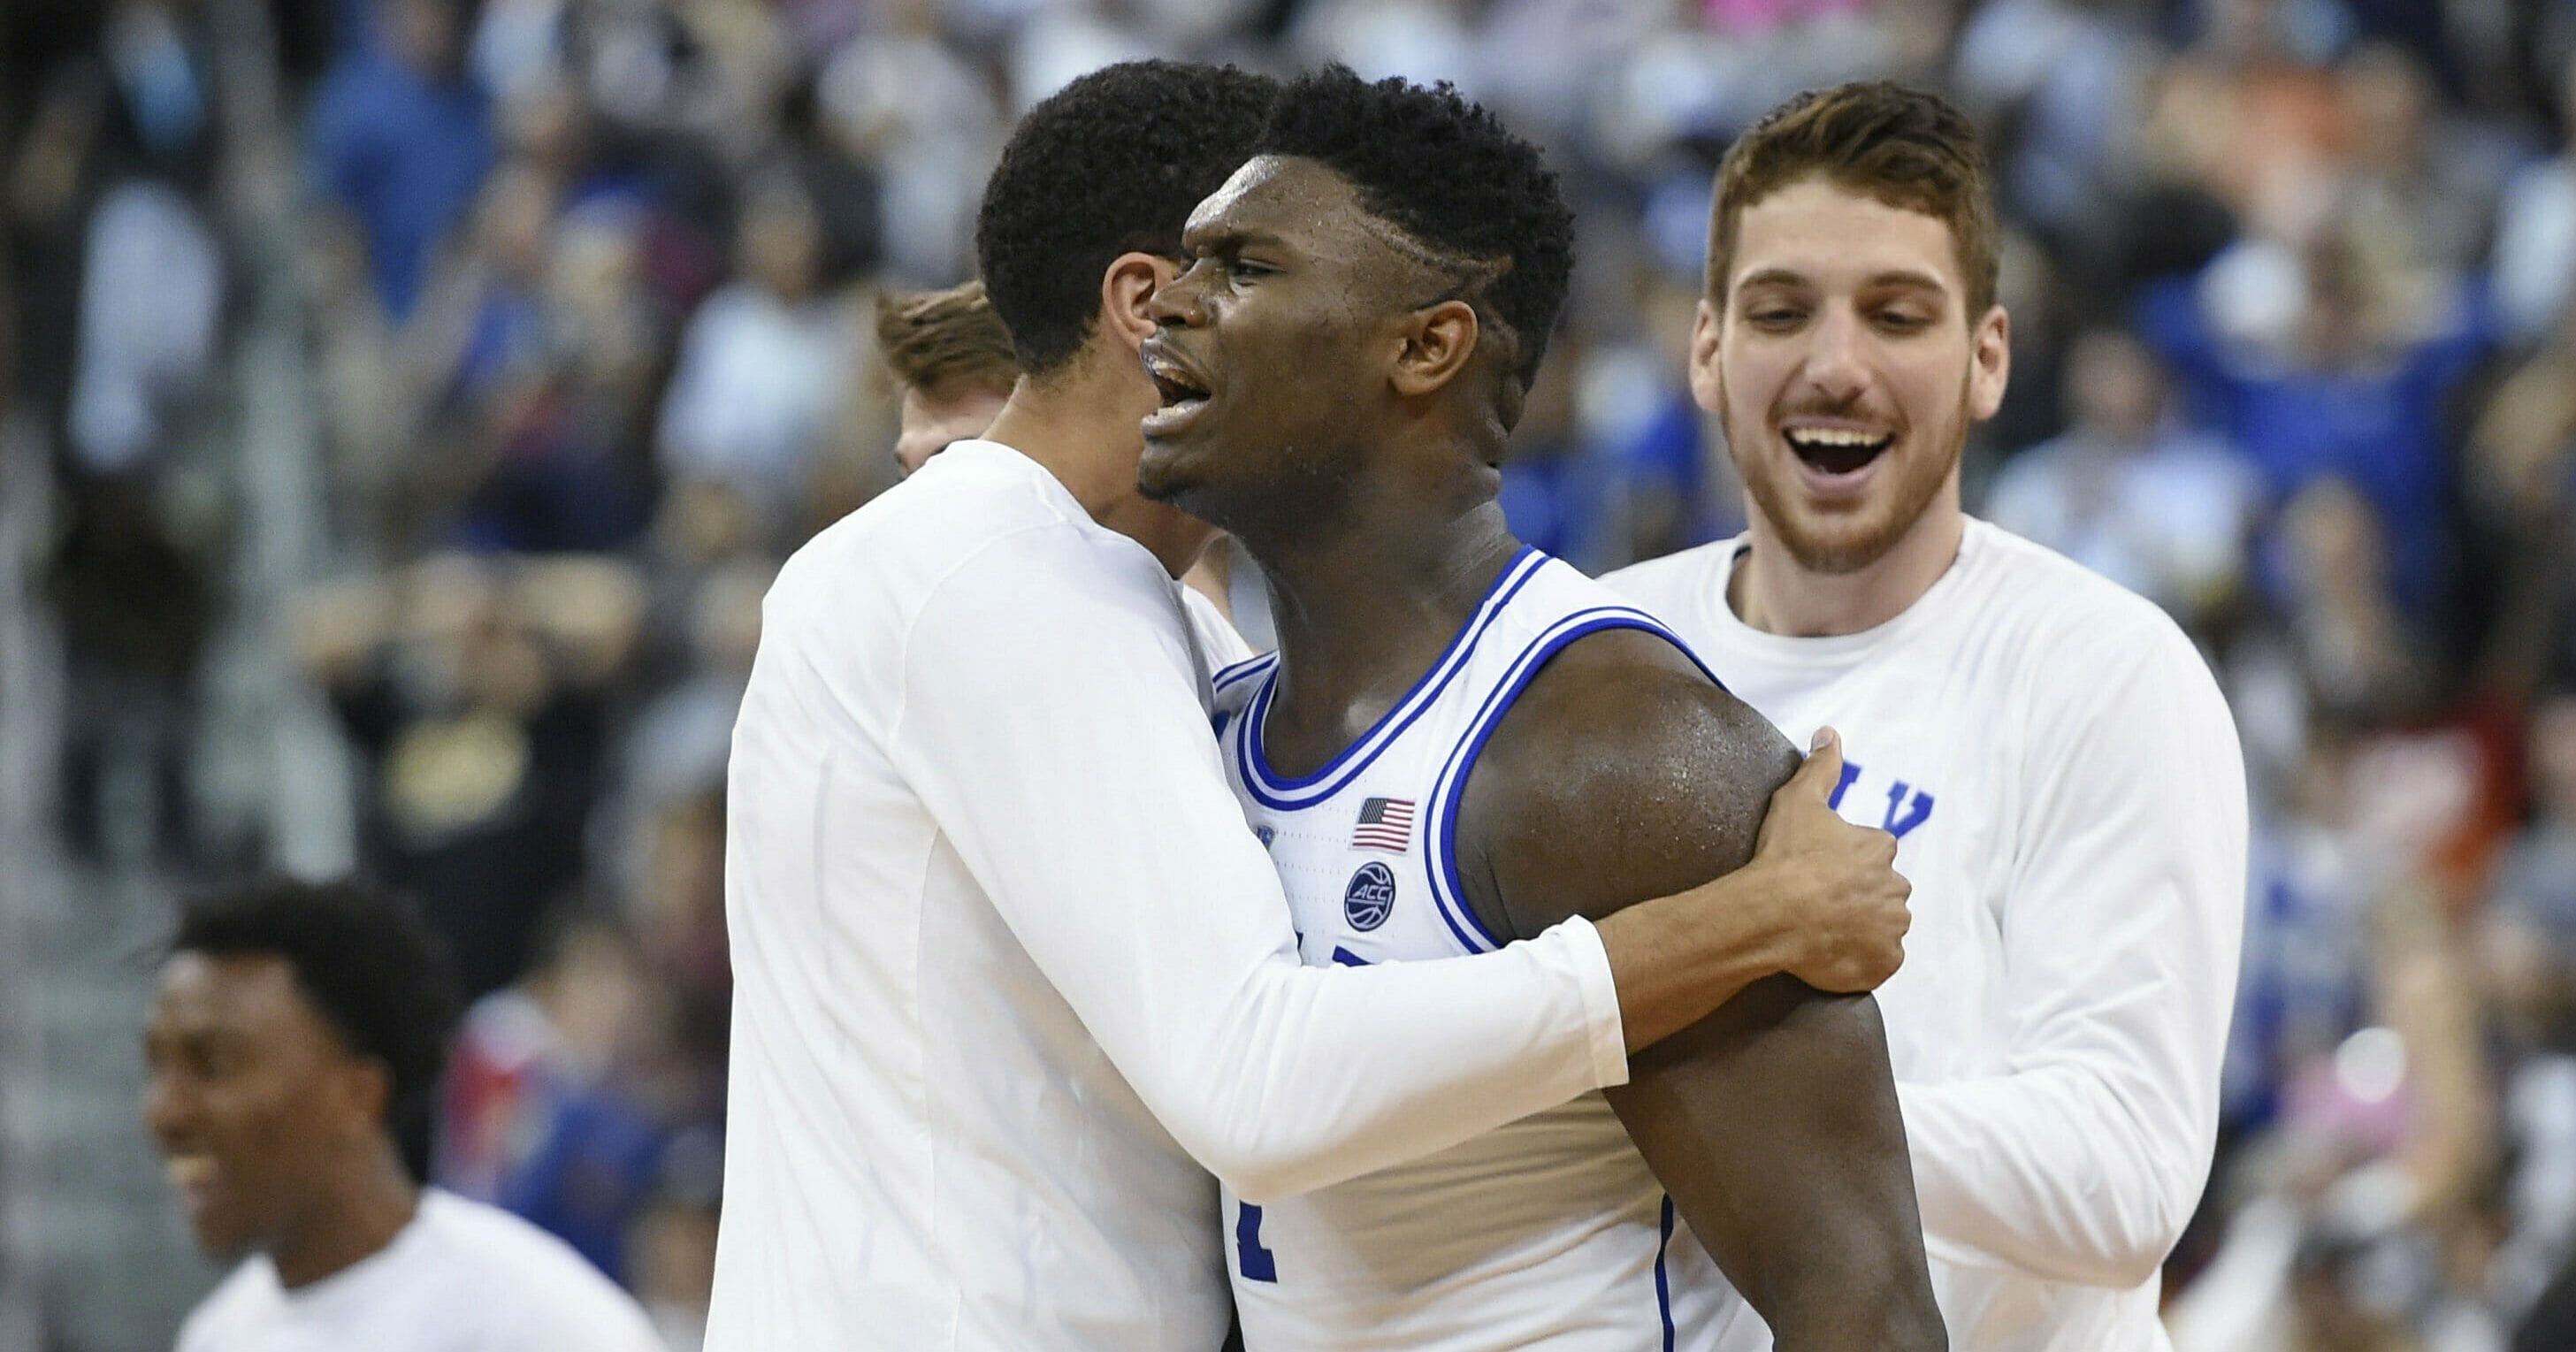 Duke's Zion Williamson, center, celebrates the team's 77-76 win over Central Florida in a second-round men's college basketball game in the NCAA Tournament in Columbia, S.C., Sunday, Mar. 24, 2019.